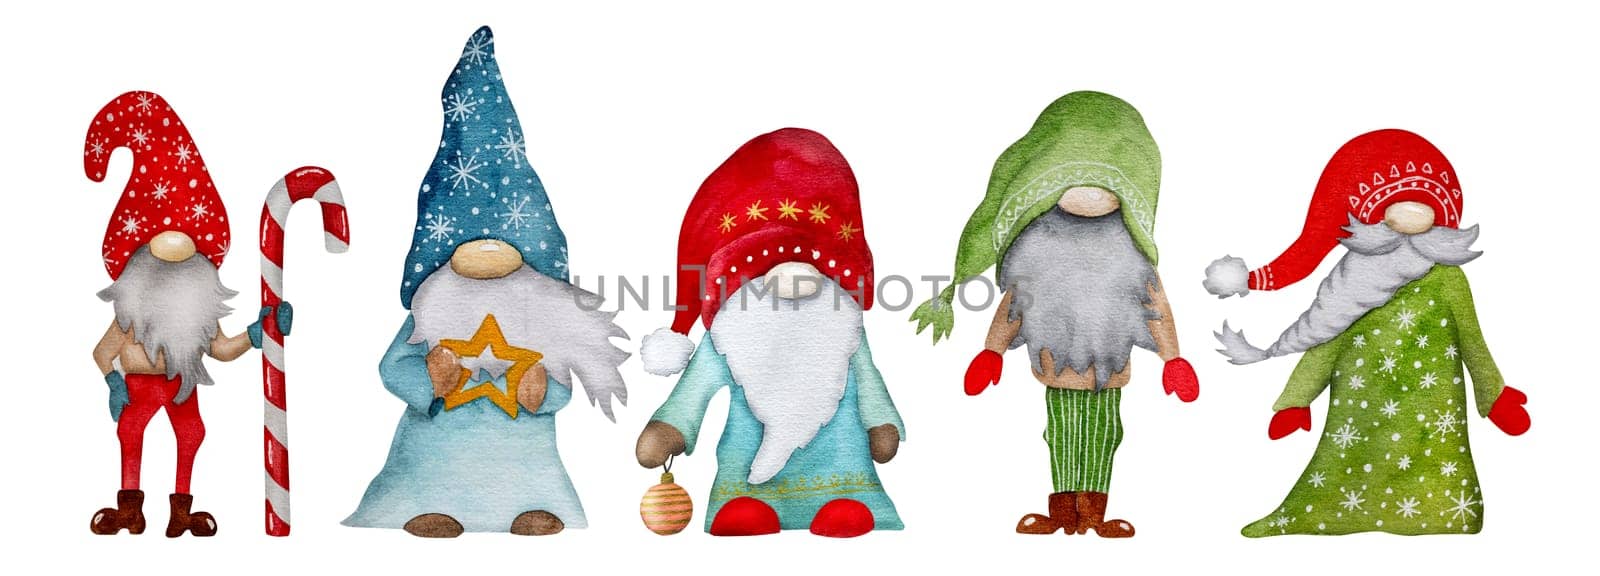 Watercolor Illustration Of Christmas Gnome In Scandinavian Style, A Set Of Gnomes For New Year'S Celebration